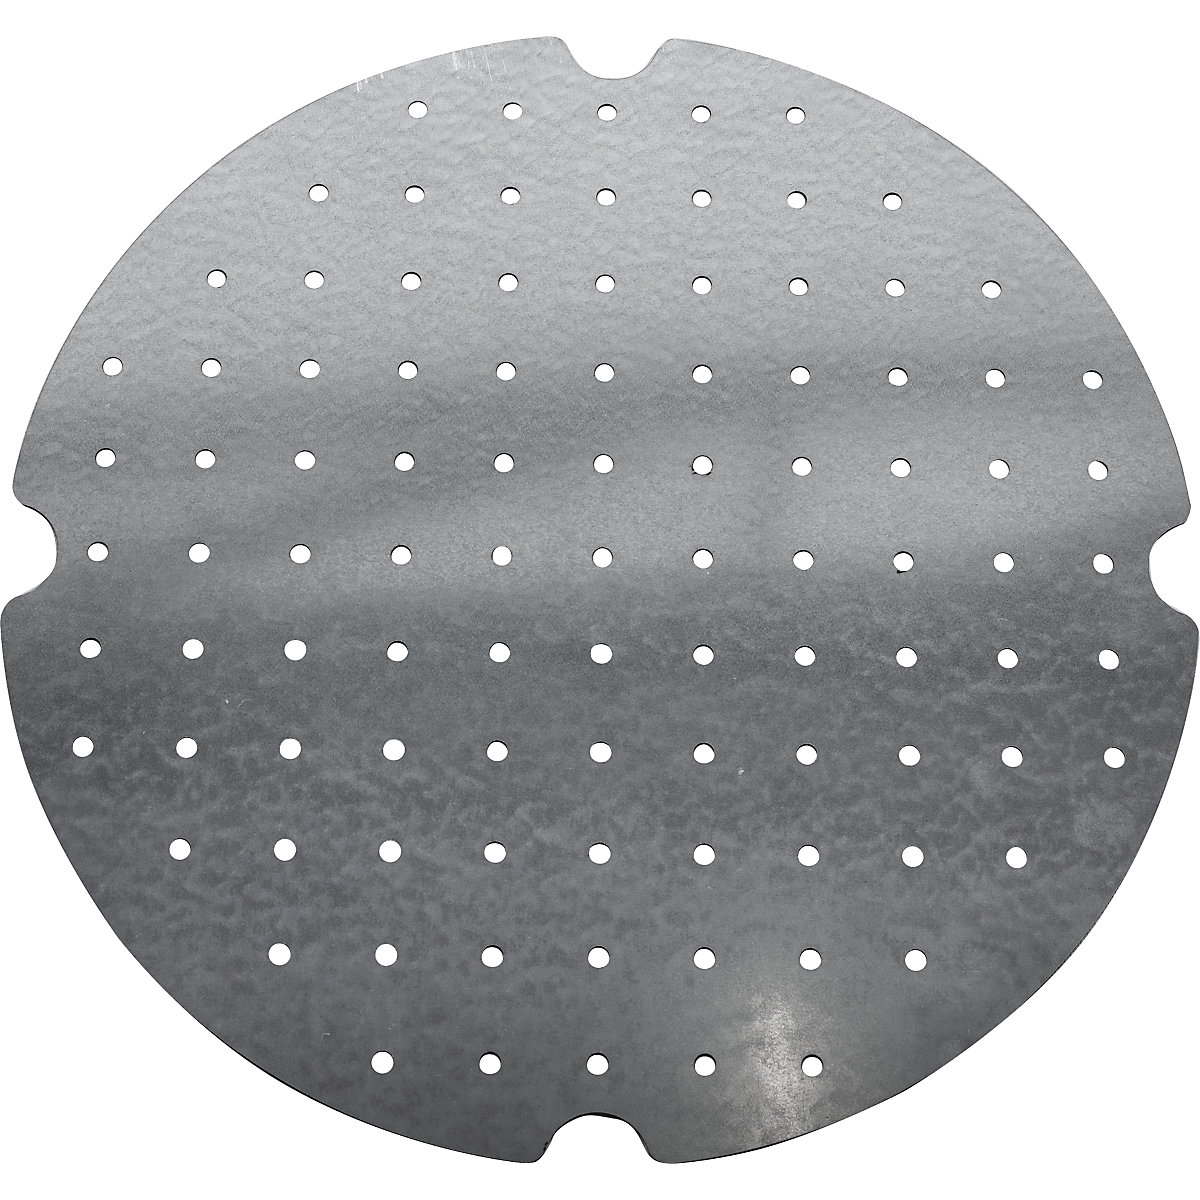 Perforated sheet support – FALCON